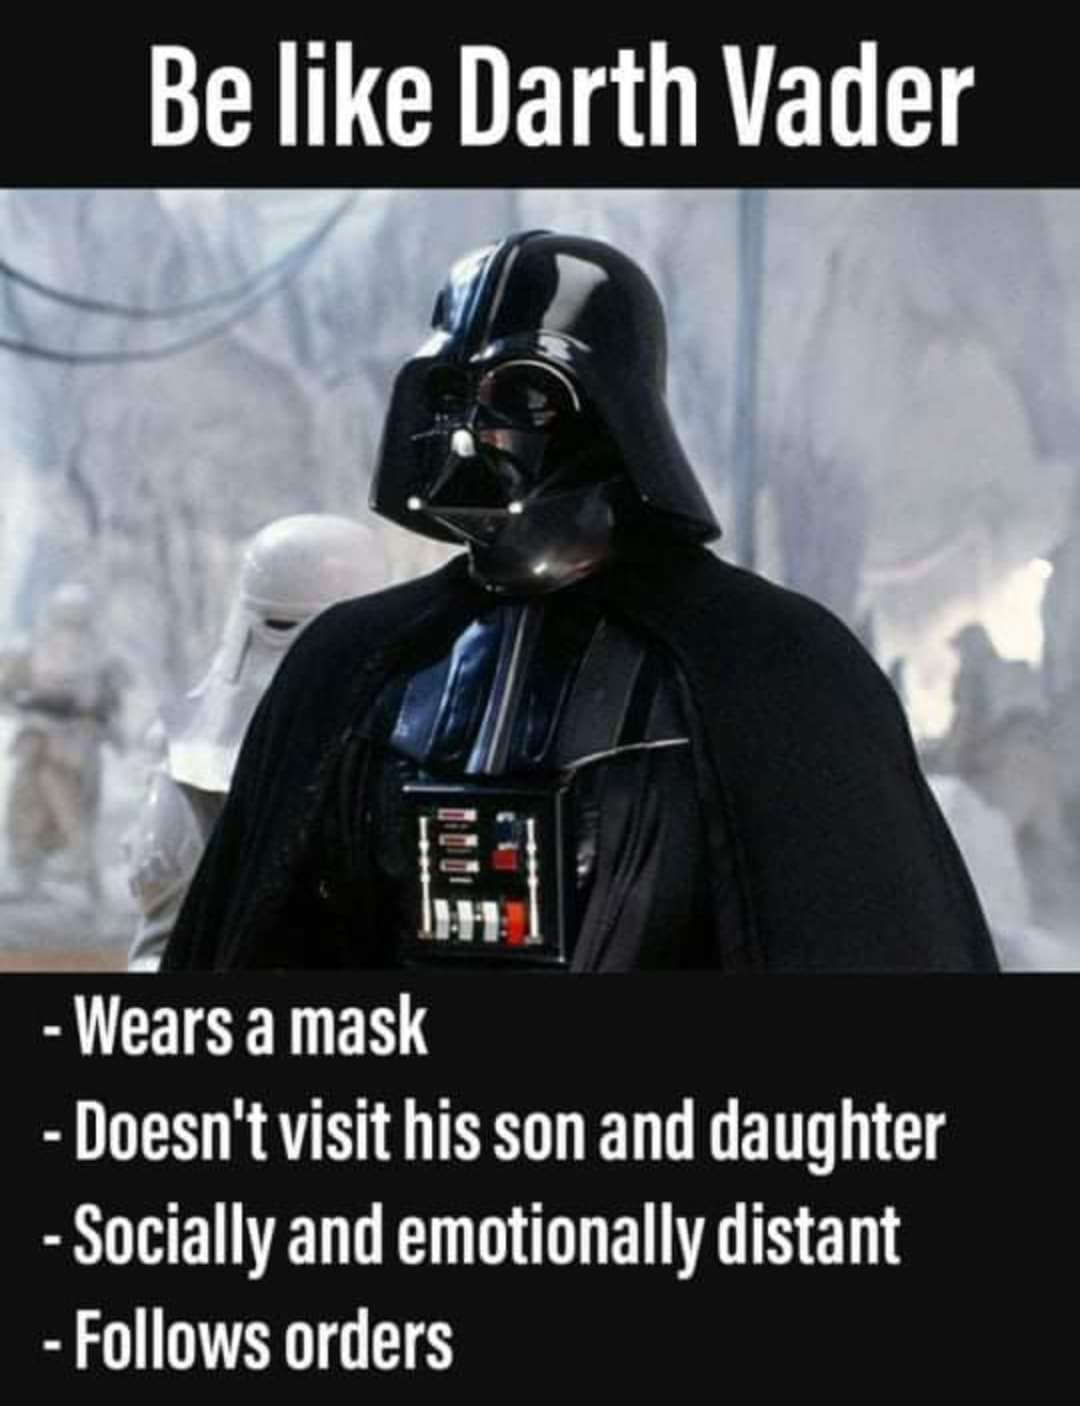 Be like Darth Vader:<br />- Wears  mask<br />- Doesn't visit his son and daughter<br />- Socially and emotionally distant<br />- Follow orders